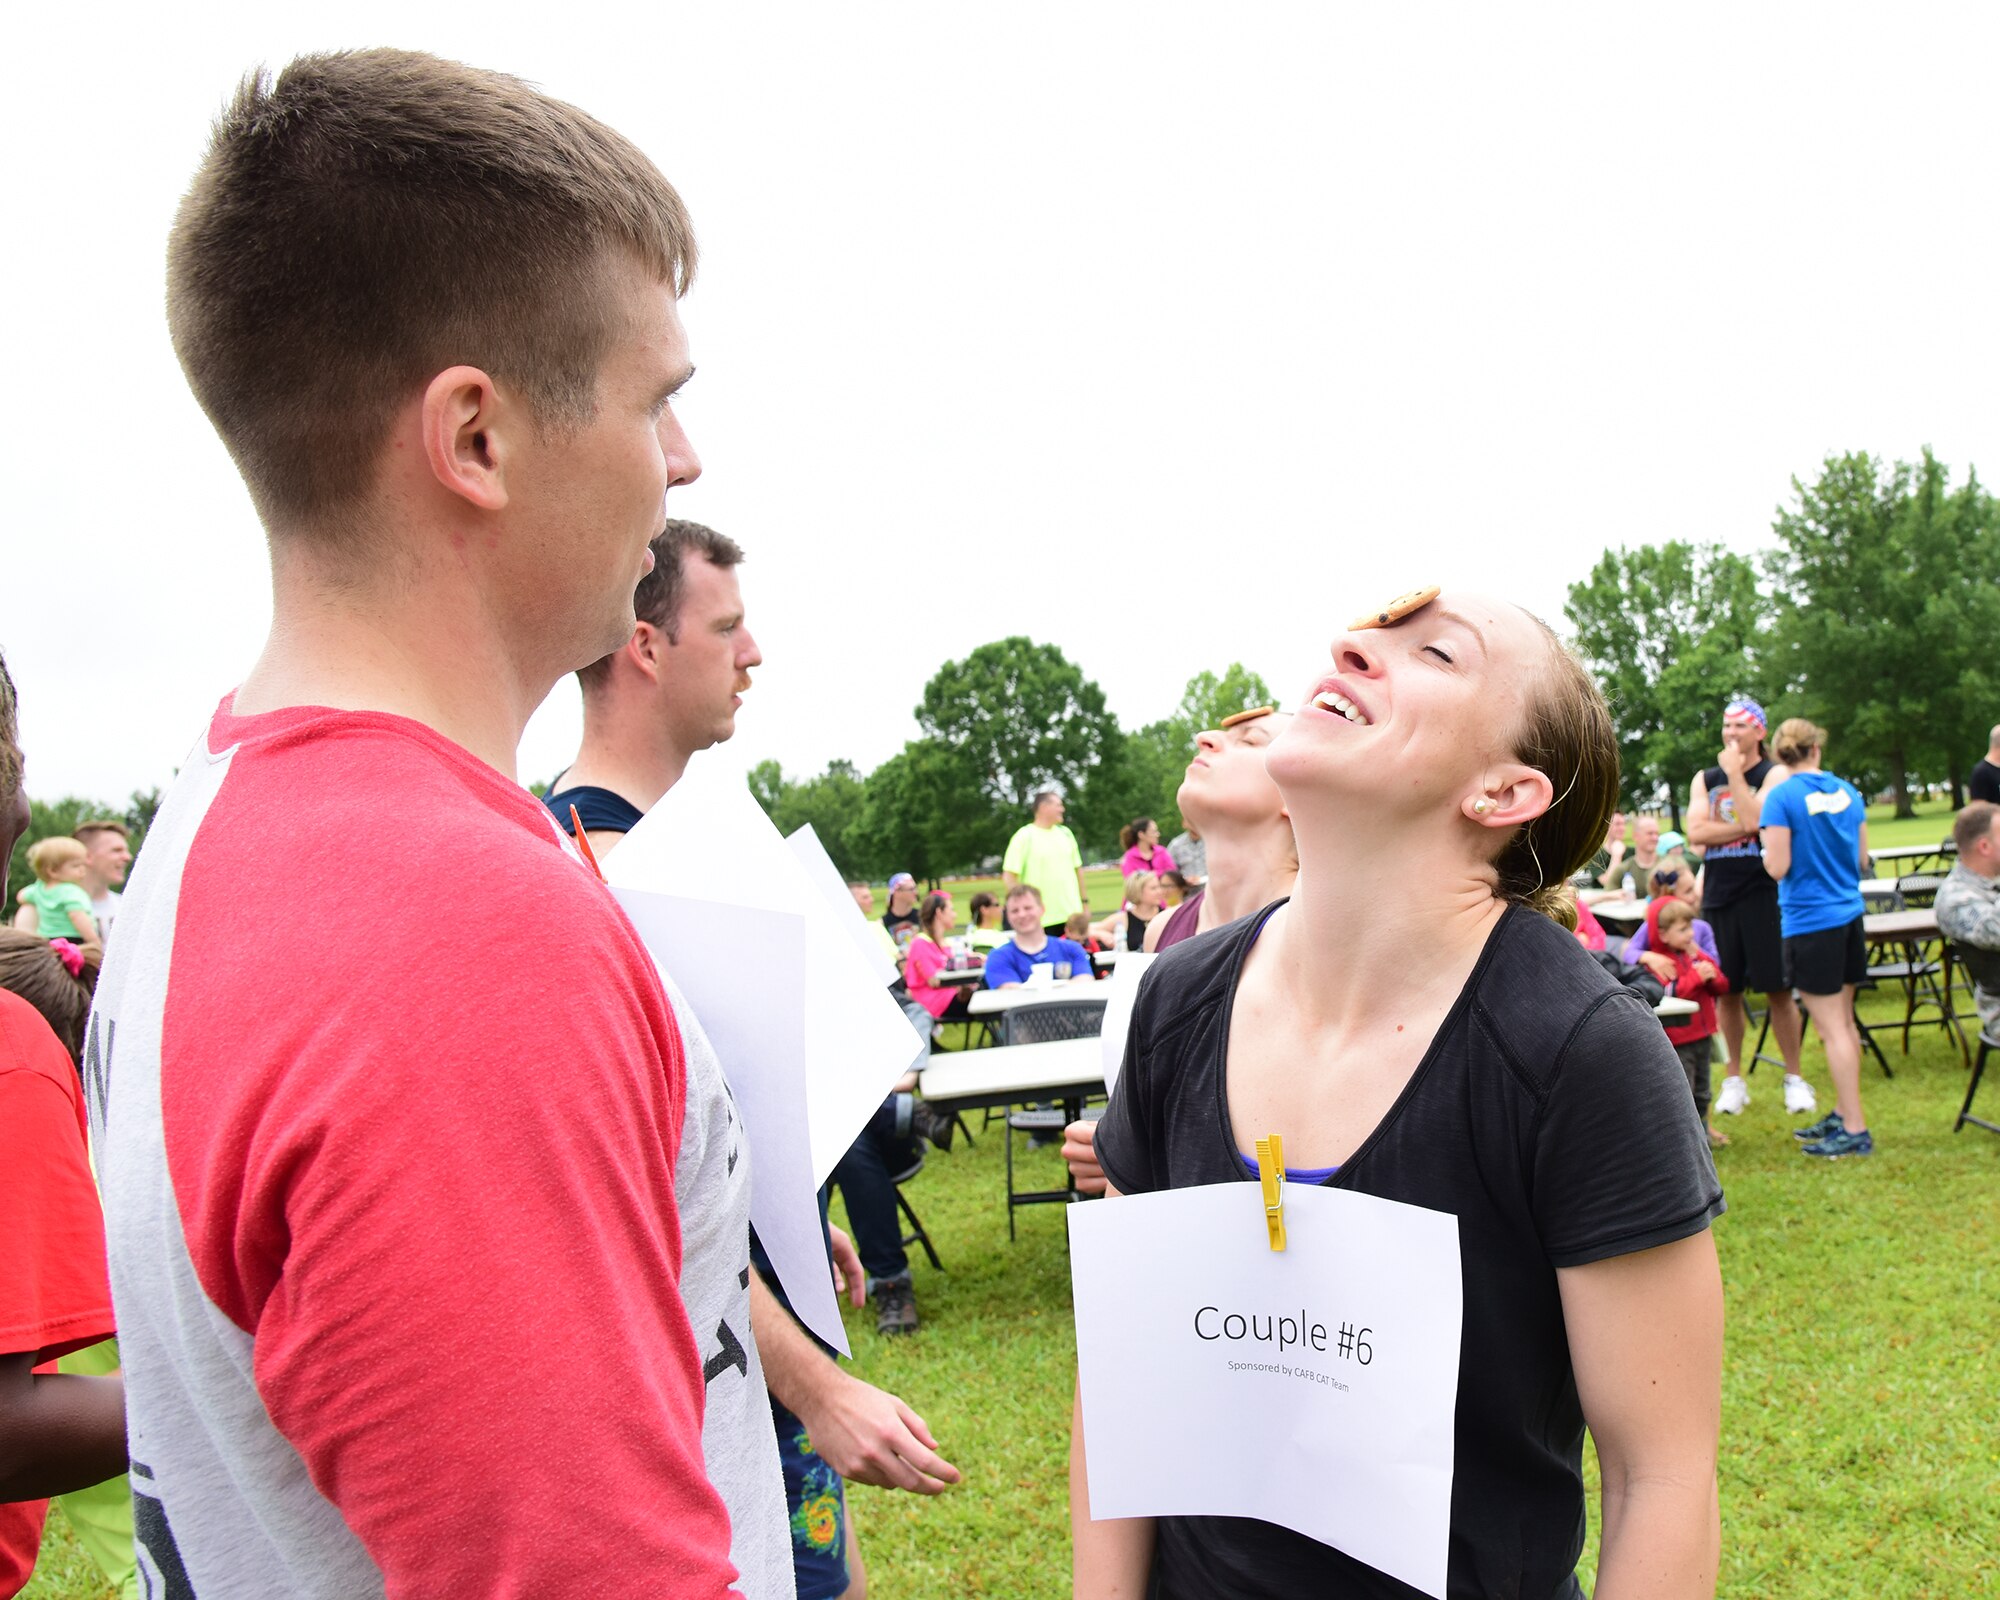 Military spouses participate in various challenges during the Military Spouse Appreciation Day barbeque May 10, 2019, on Columbus Air Force Base, Miss. Similar to the challenges in the international game show, Minute to Win It, spouse groups raced against each other in a competition to see who could complete the challenges in the shortest amount of time. (U.S. Air Force photo by Melissa Doublin)